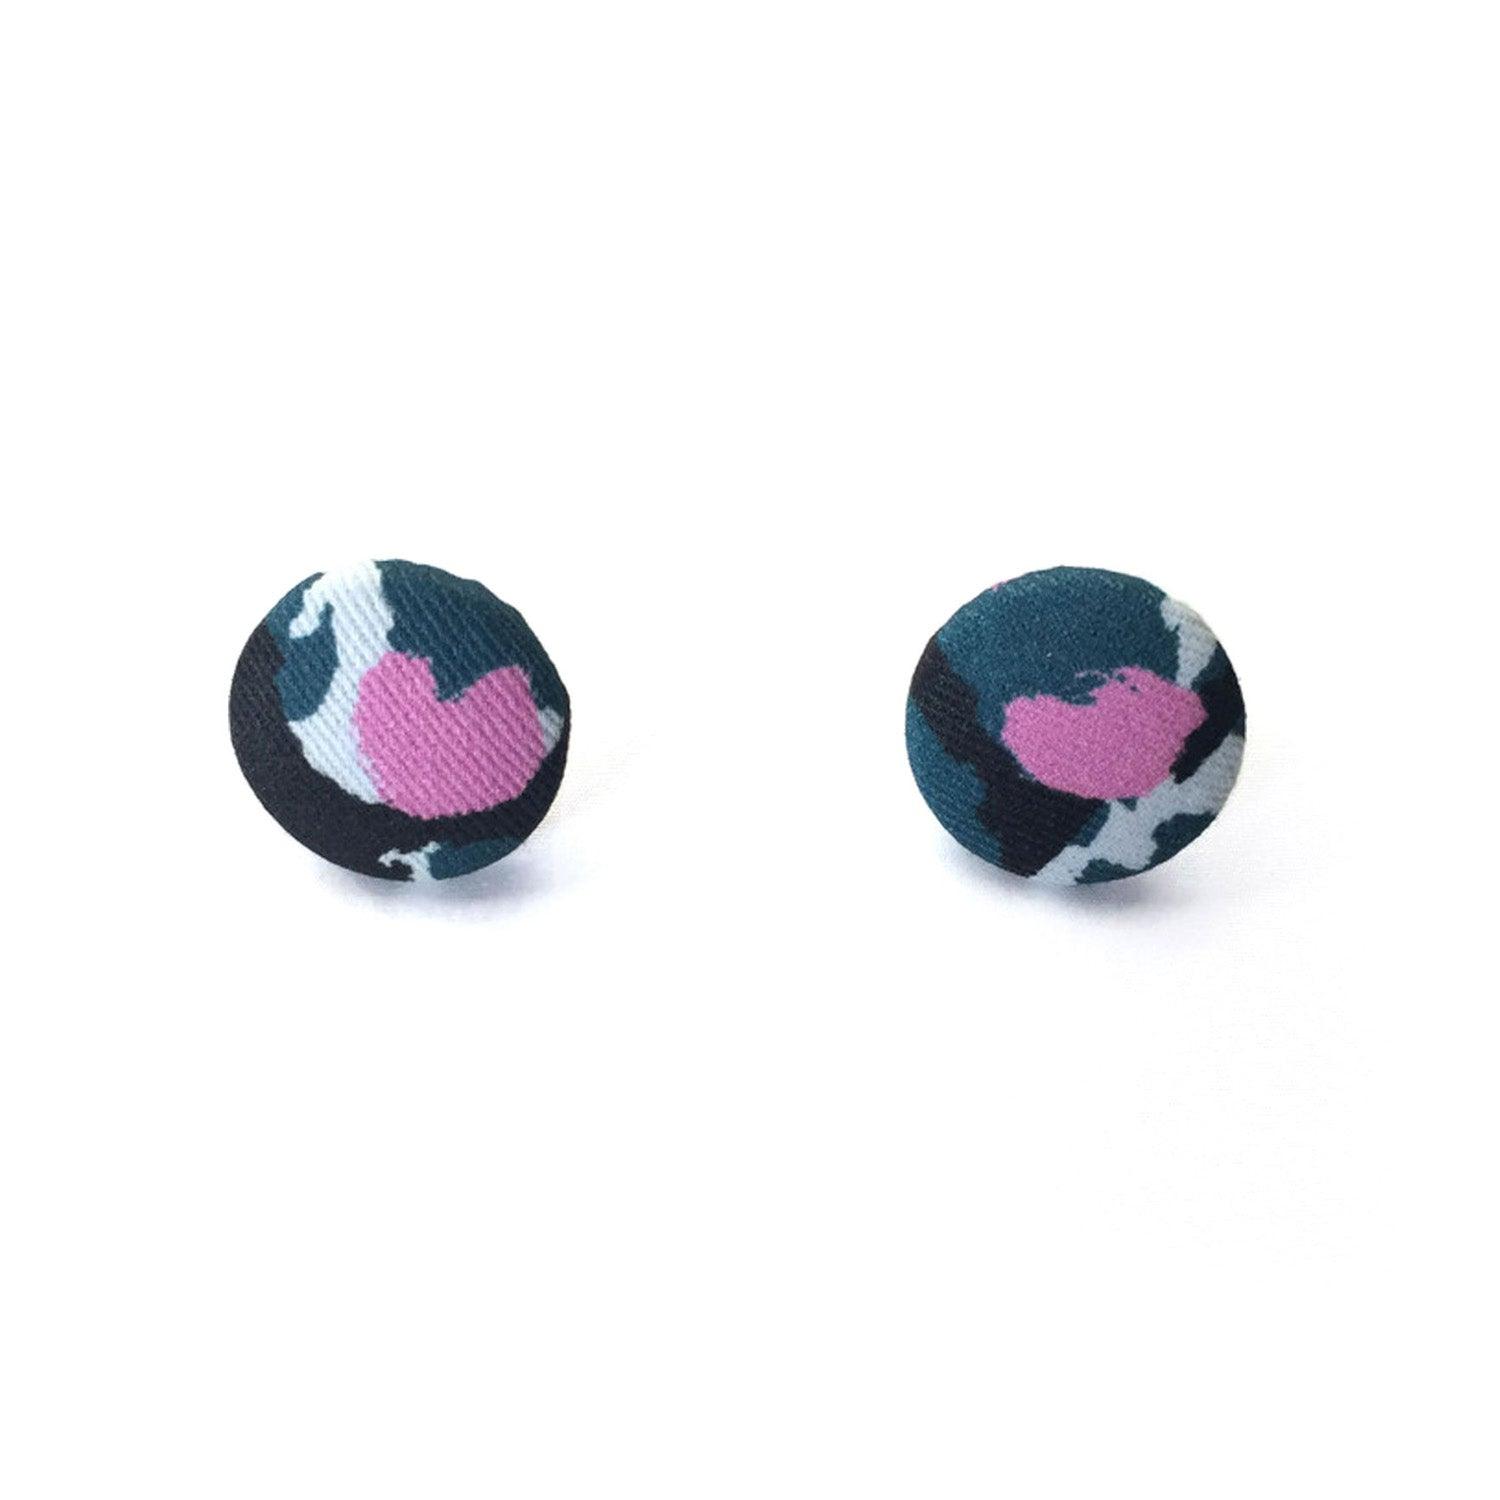 Fabric Covered Button Earrings With Torto Pattern - OlaOla